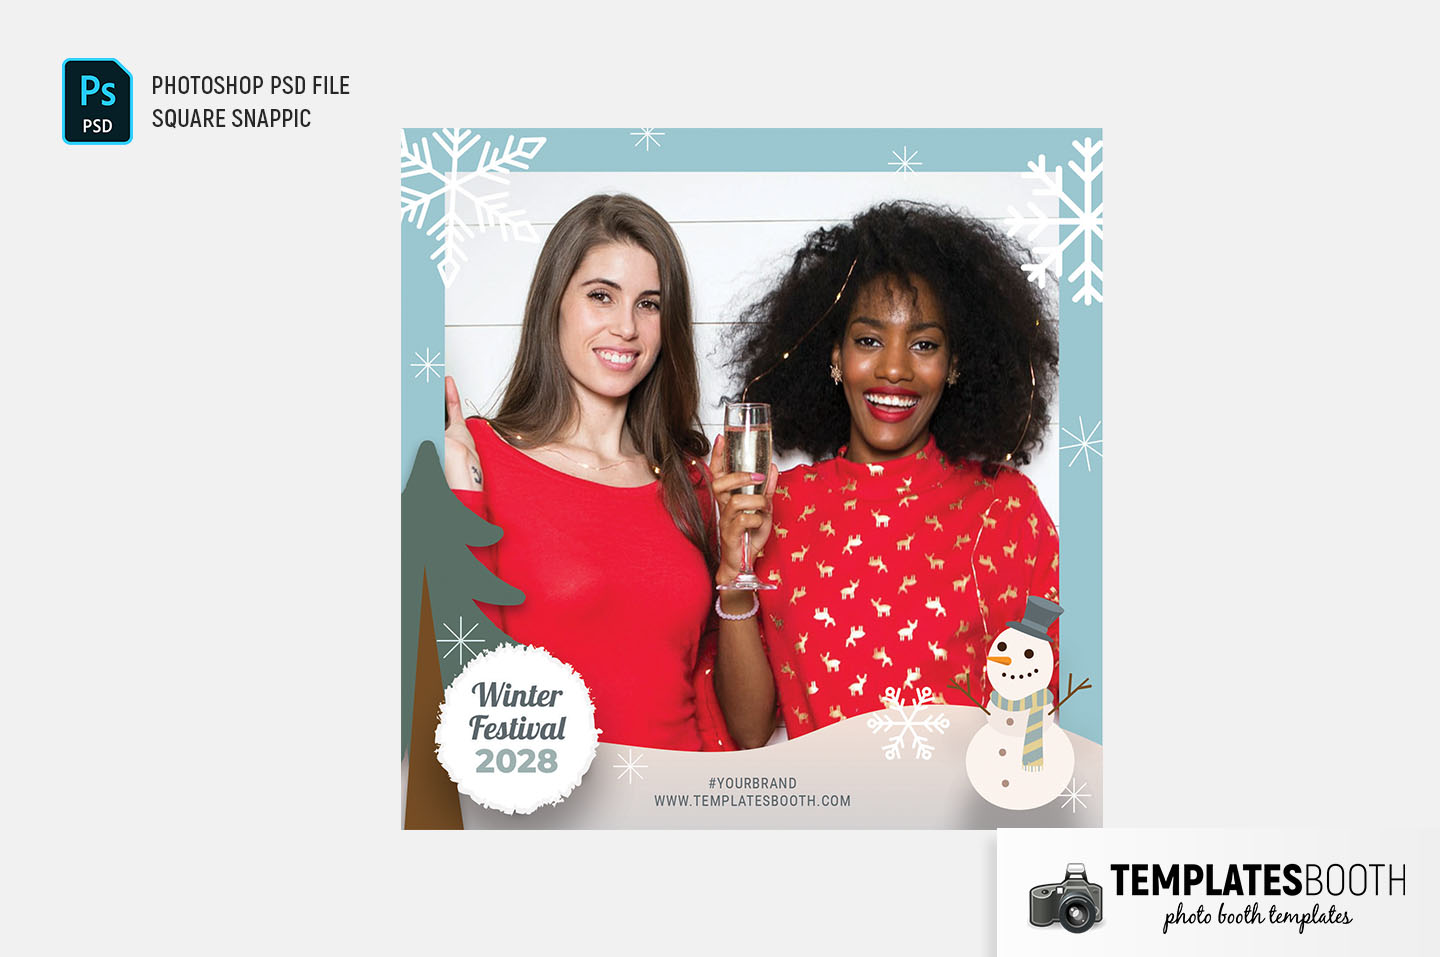 Winter Festival Photo Booth Template (Snappic)